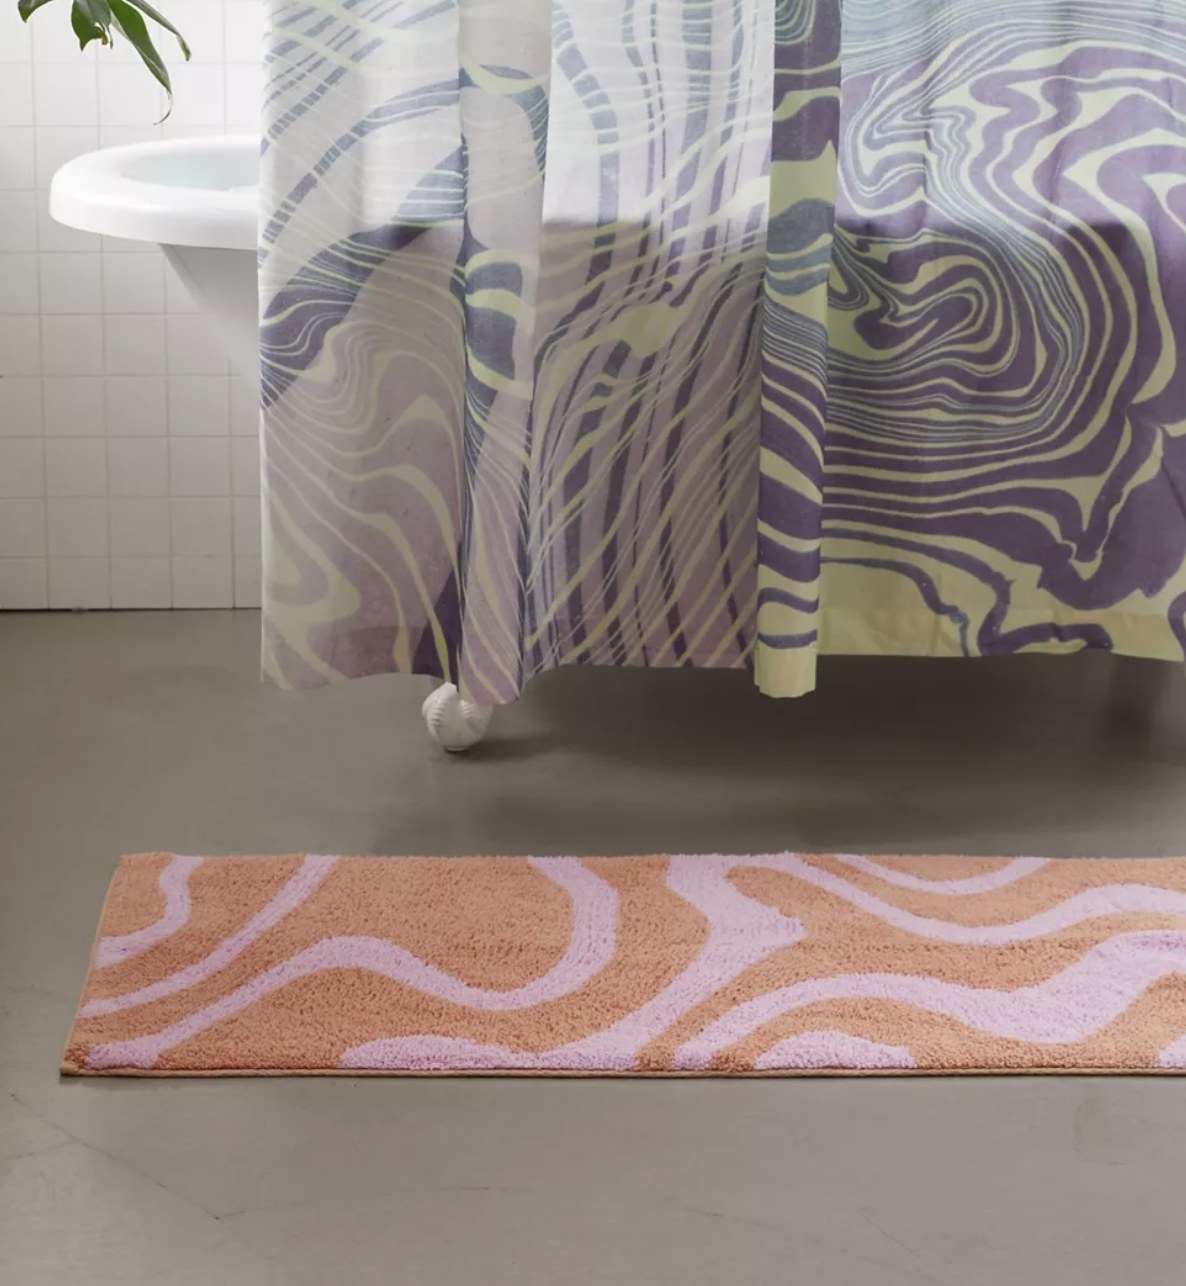 A Pink and orange marble patterned bath mat in front of a tub with a shower curtain